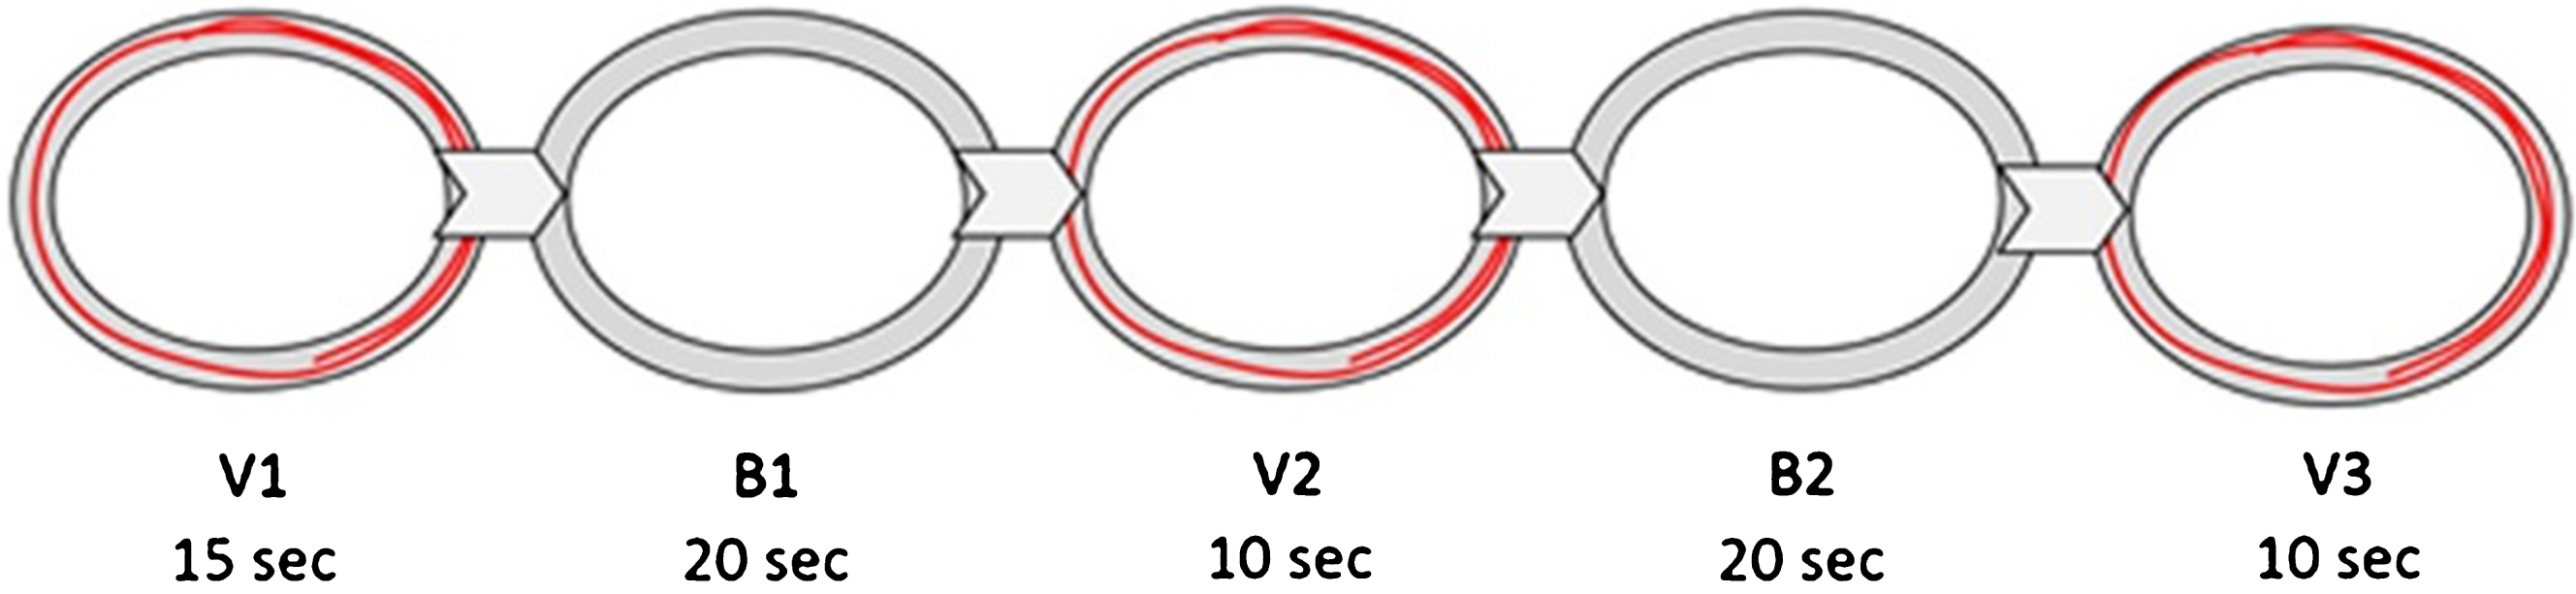 An illustration of the five segments of each exercise trial. A gray area bounded by two concentric black ellipses mark the target area on the phase plane, within which participants are asked to maintain the cursor. During V1, V2 and V3, a red trace representing the forearm movement is displayed on the screen. During B1 and B2, the trace of the movement is not displayed on the screen. The time span for each segment is marked below the segment name.